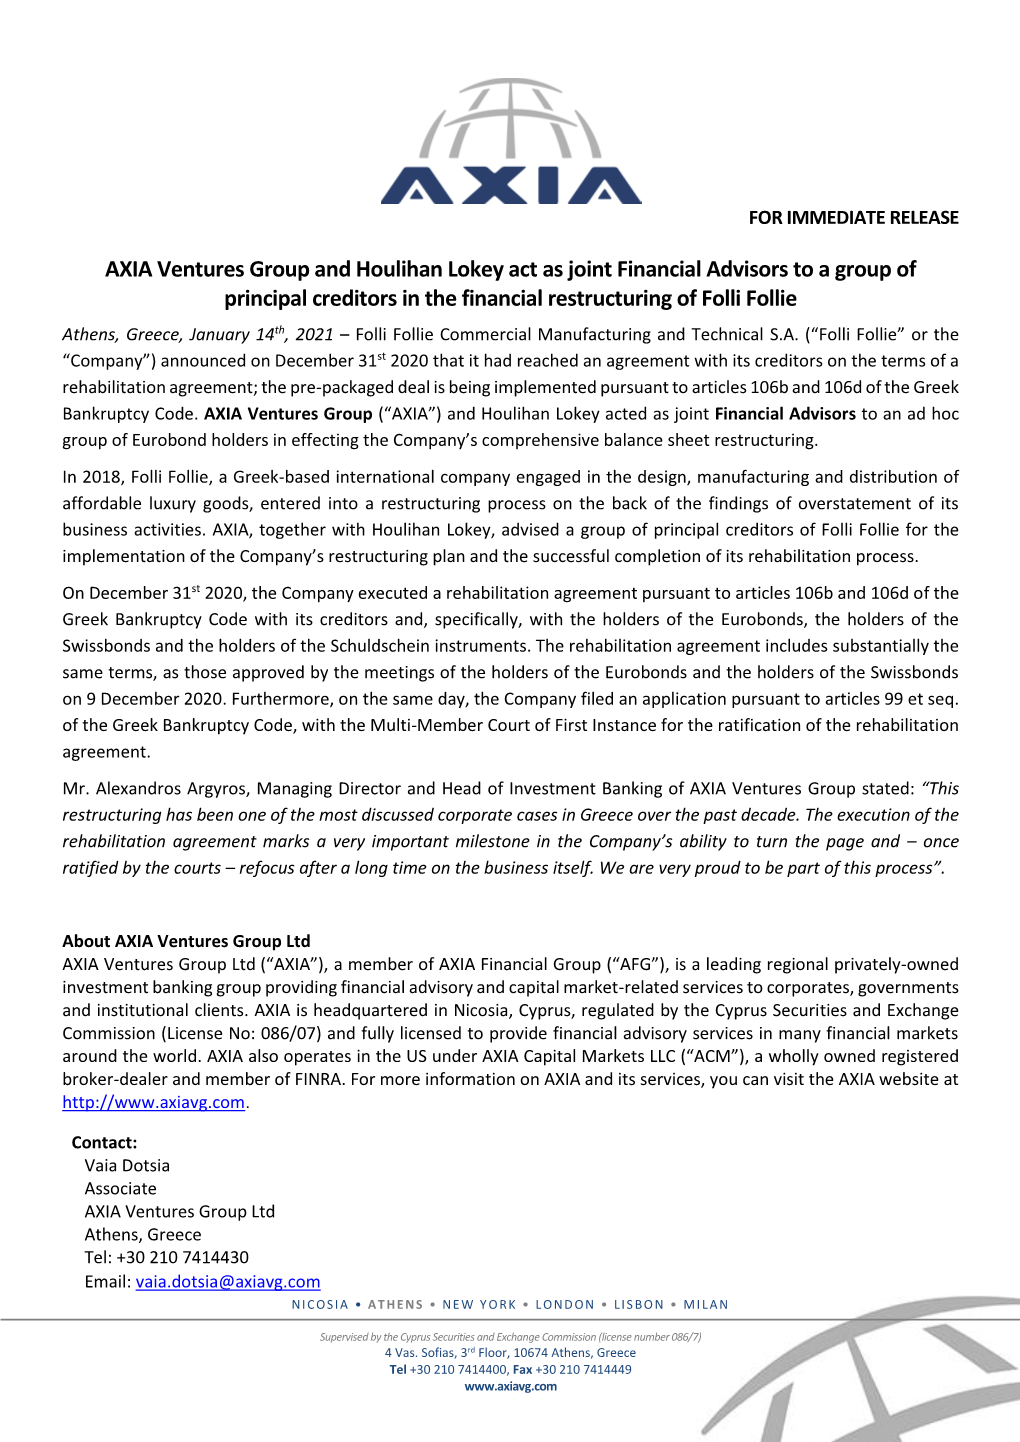 AXIA Ventures Group and Houlihan Lokey Act As Joint Financial